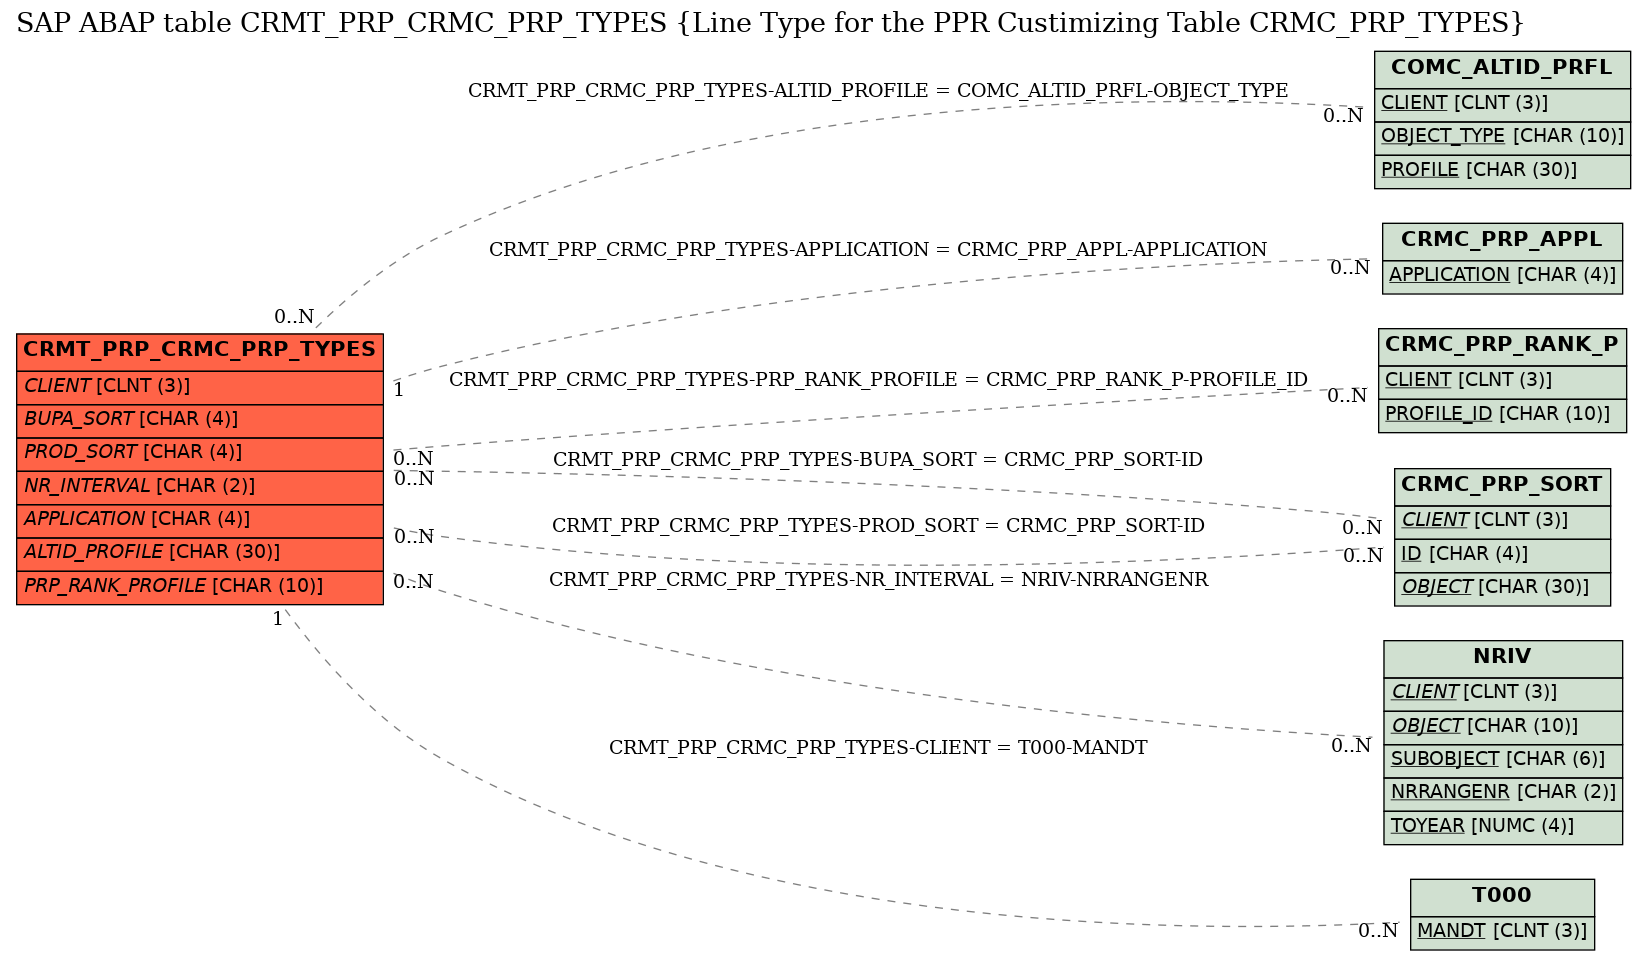 E-R Diagram for table CRMT_PRP_CRMC_PRP_TYPES (Line Type for the PPR Custimizing Table CRMC_PRP_TYPES)